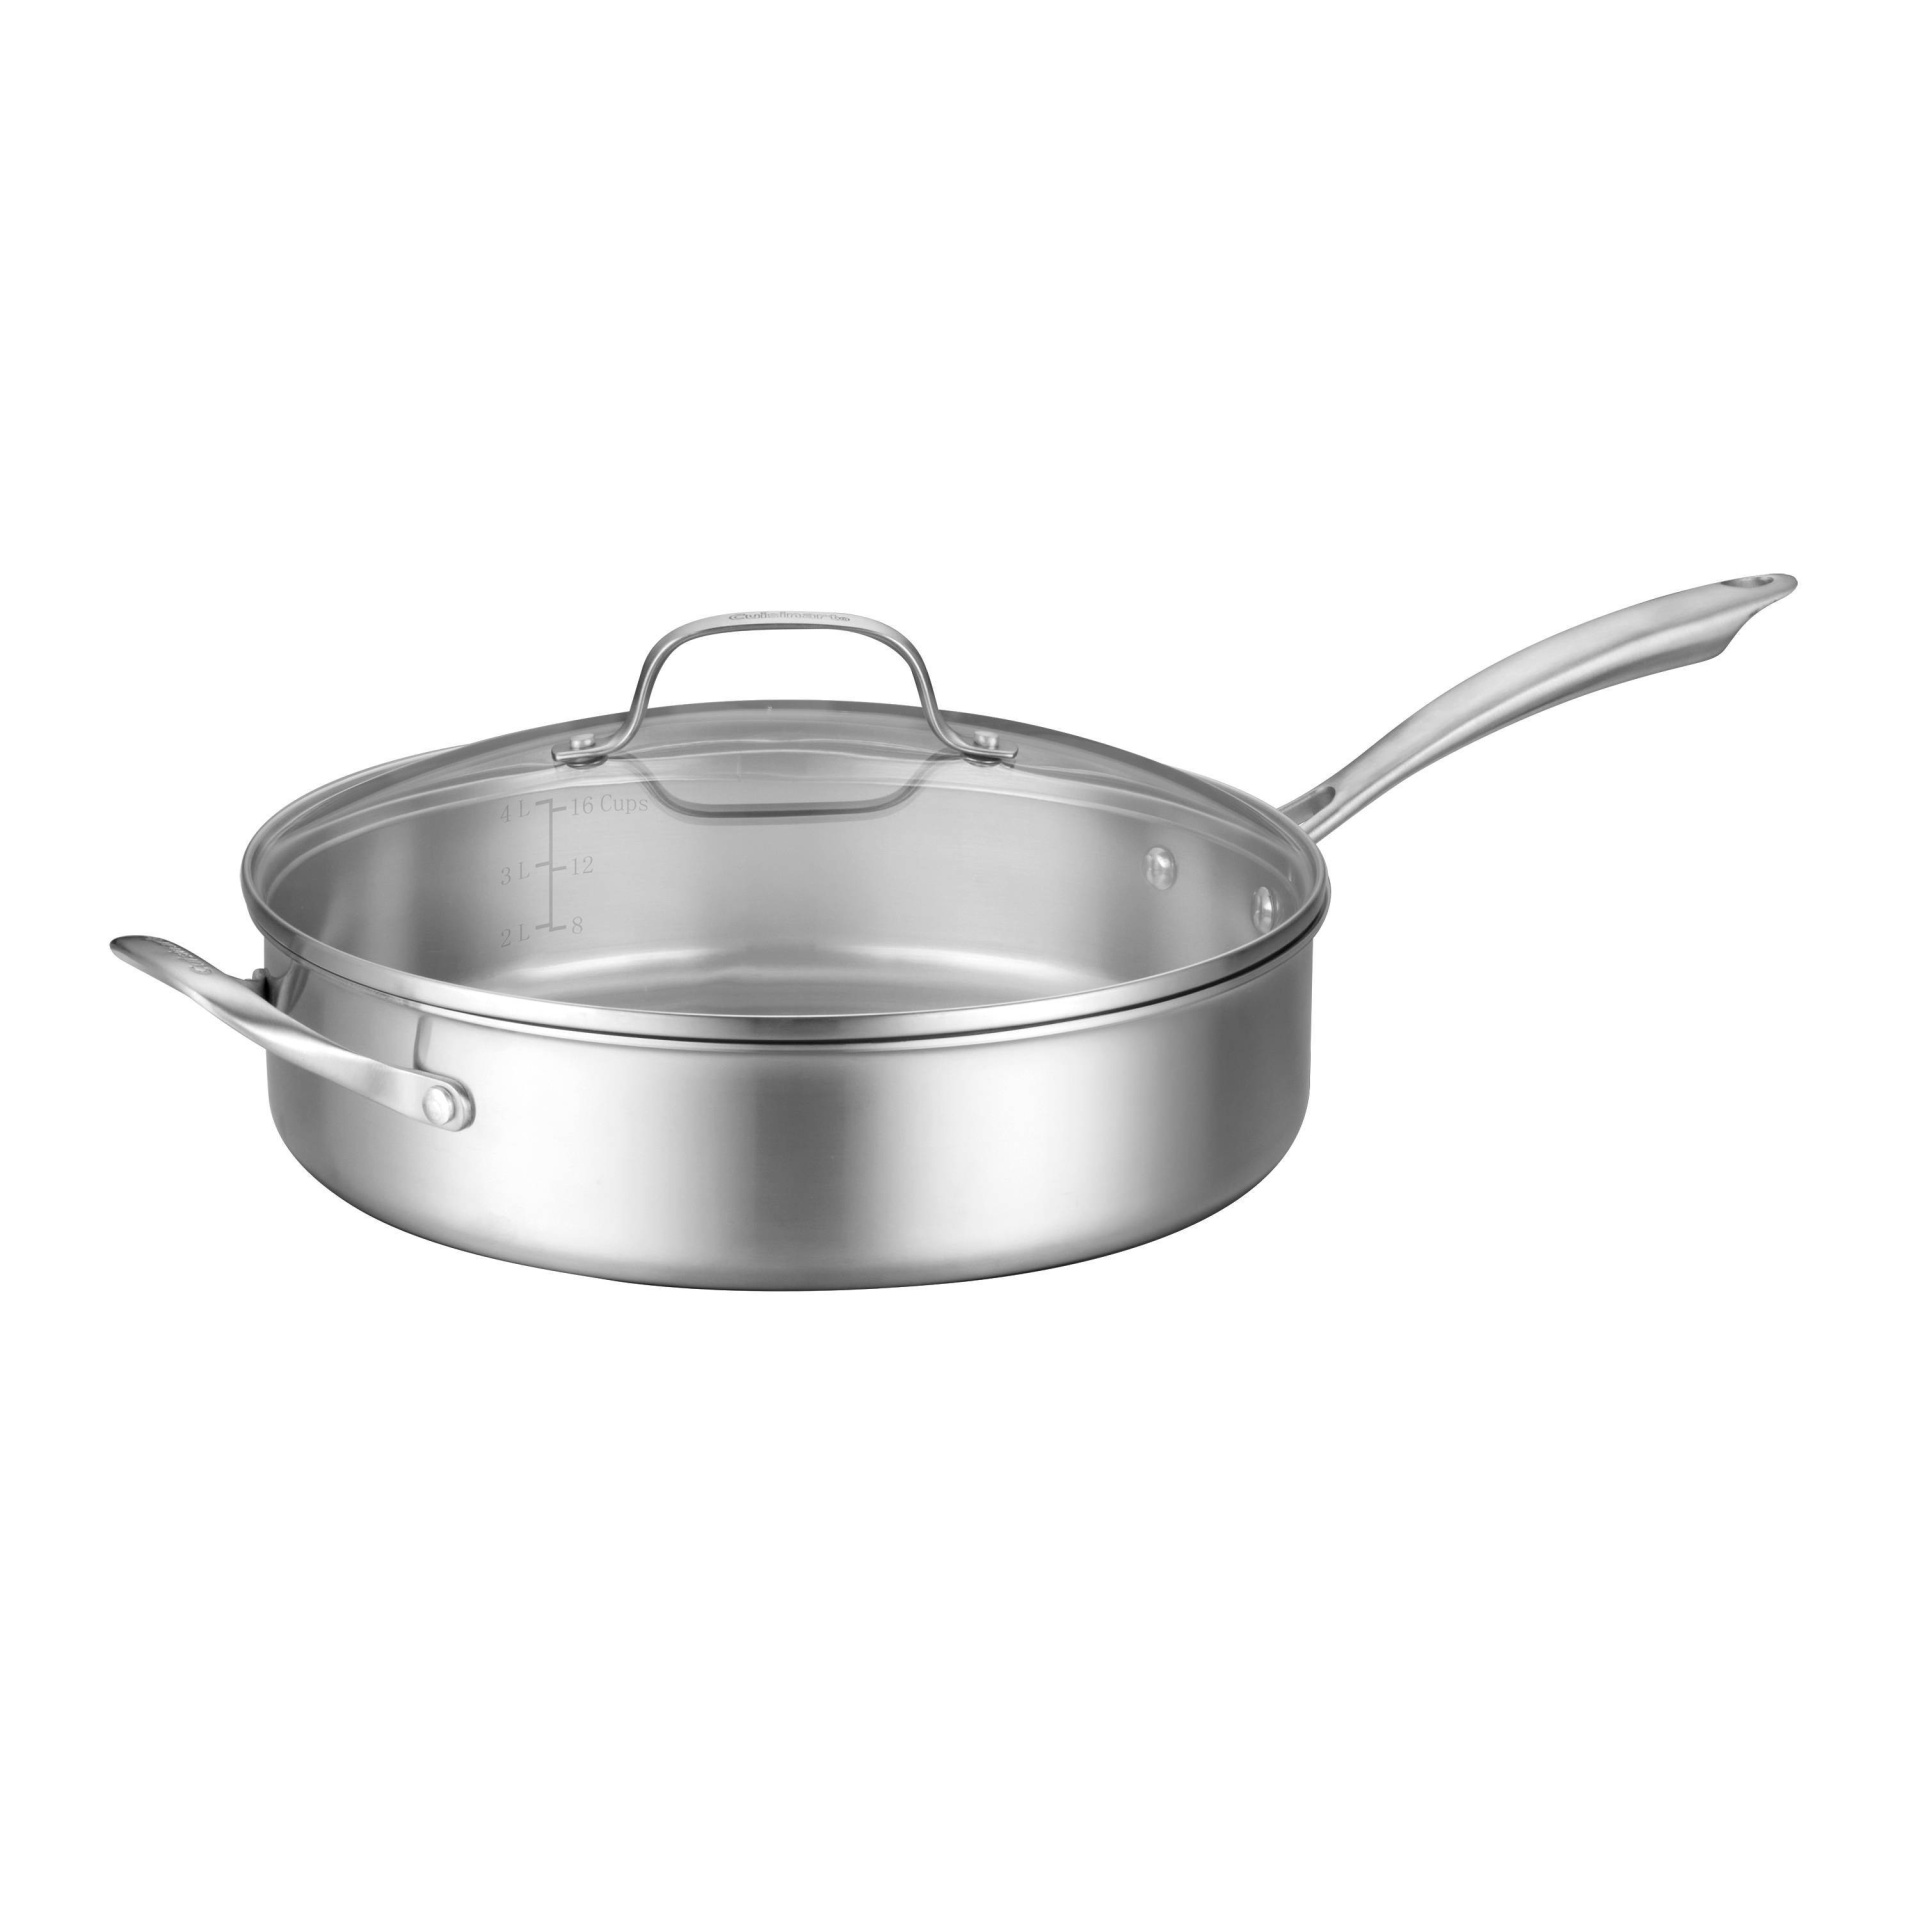 slide 1 of 5, Cuisinart Classic MultiClad 5.5qt Stainless Steel Tri-Ply Saute Pan with Cover - MCS33-30H, 5.5 qt